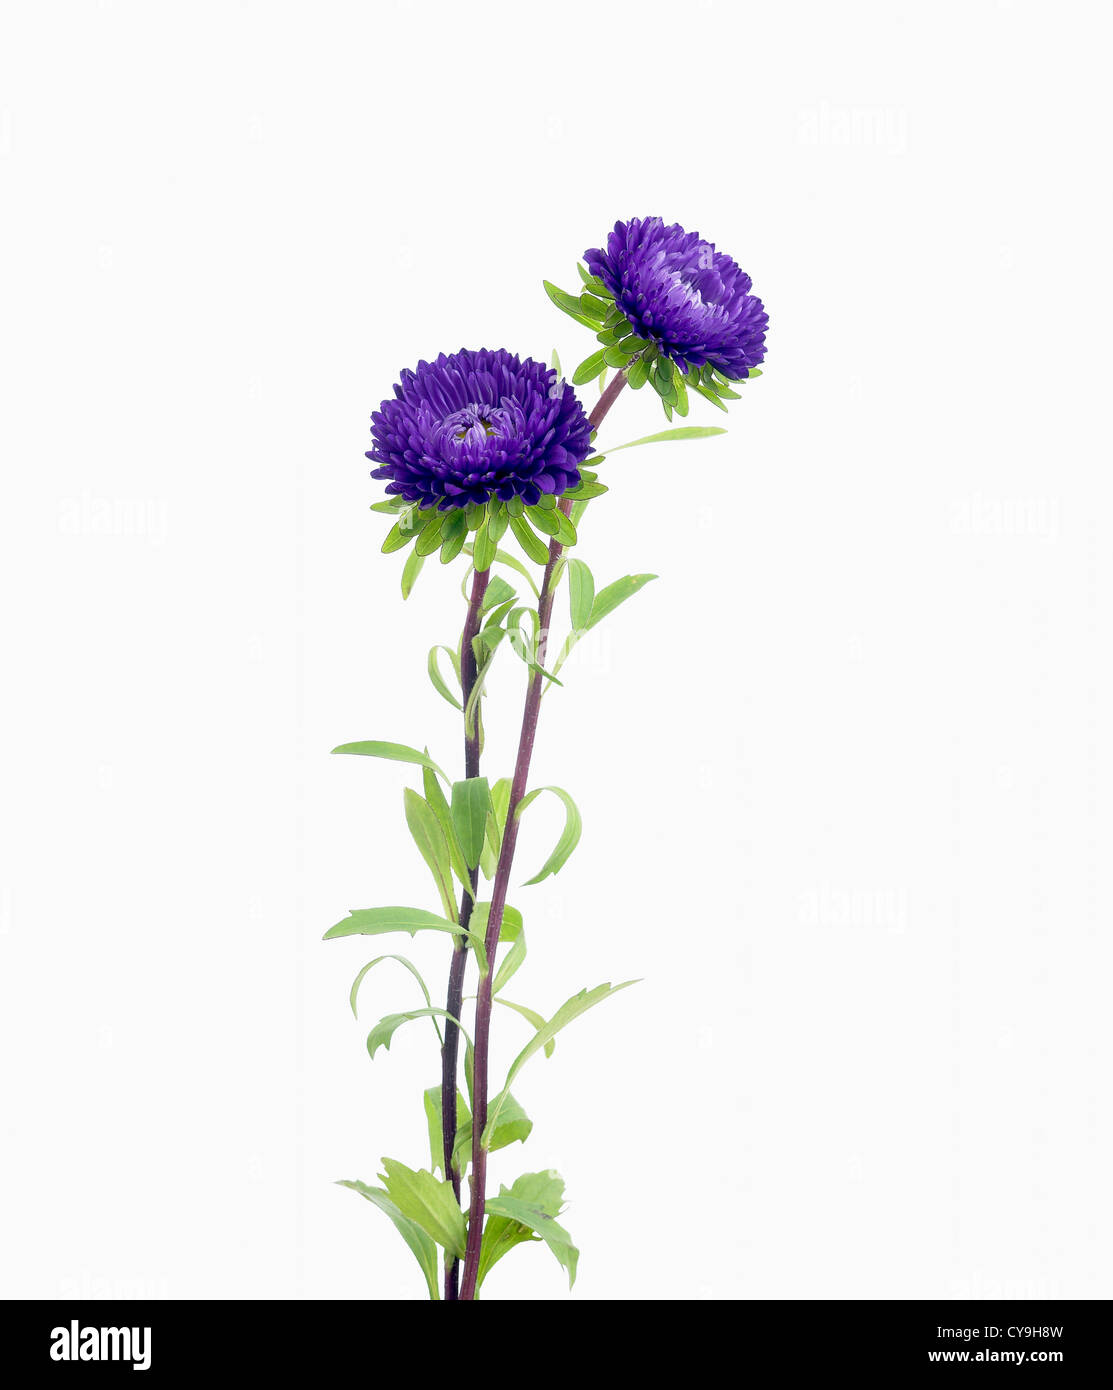 Callistephus chinensis 'Matsumoto', China aster. Purple flowers on stems against a white background. Stock Photo